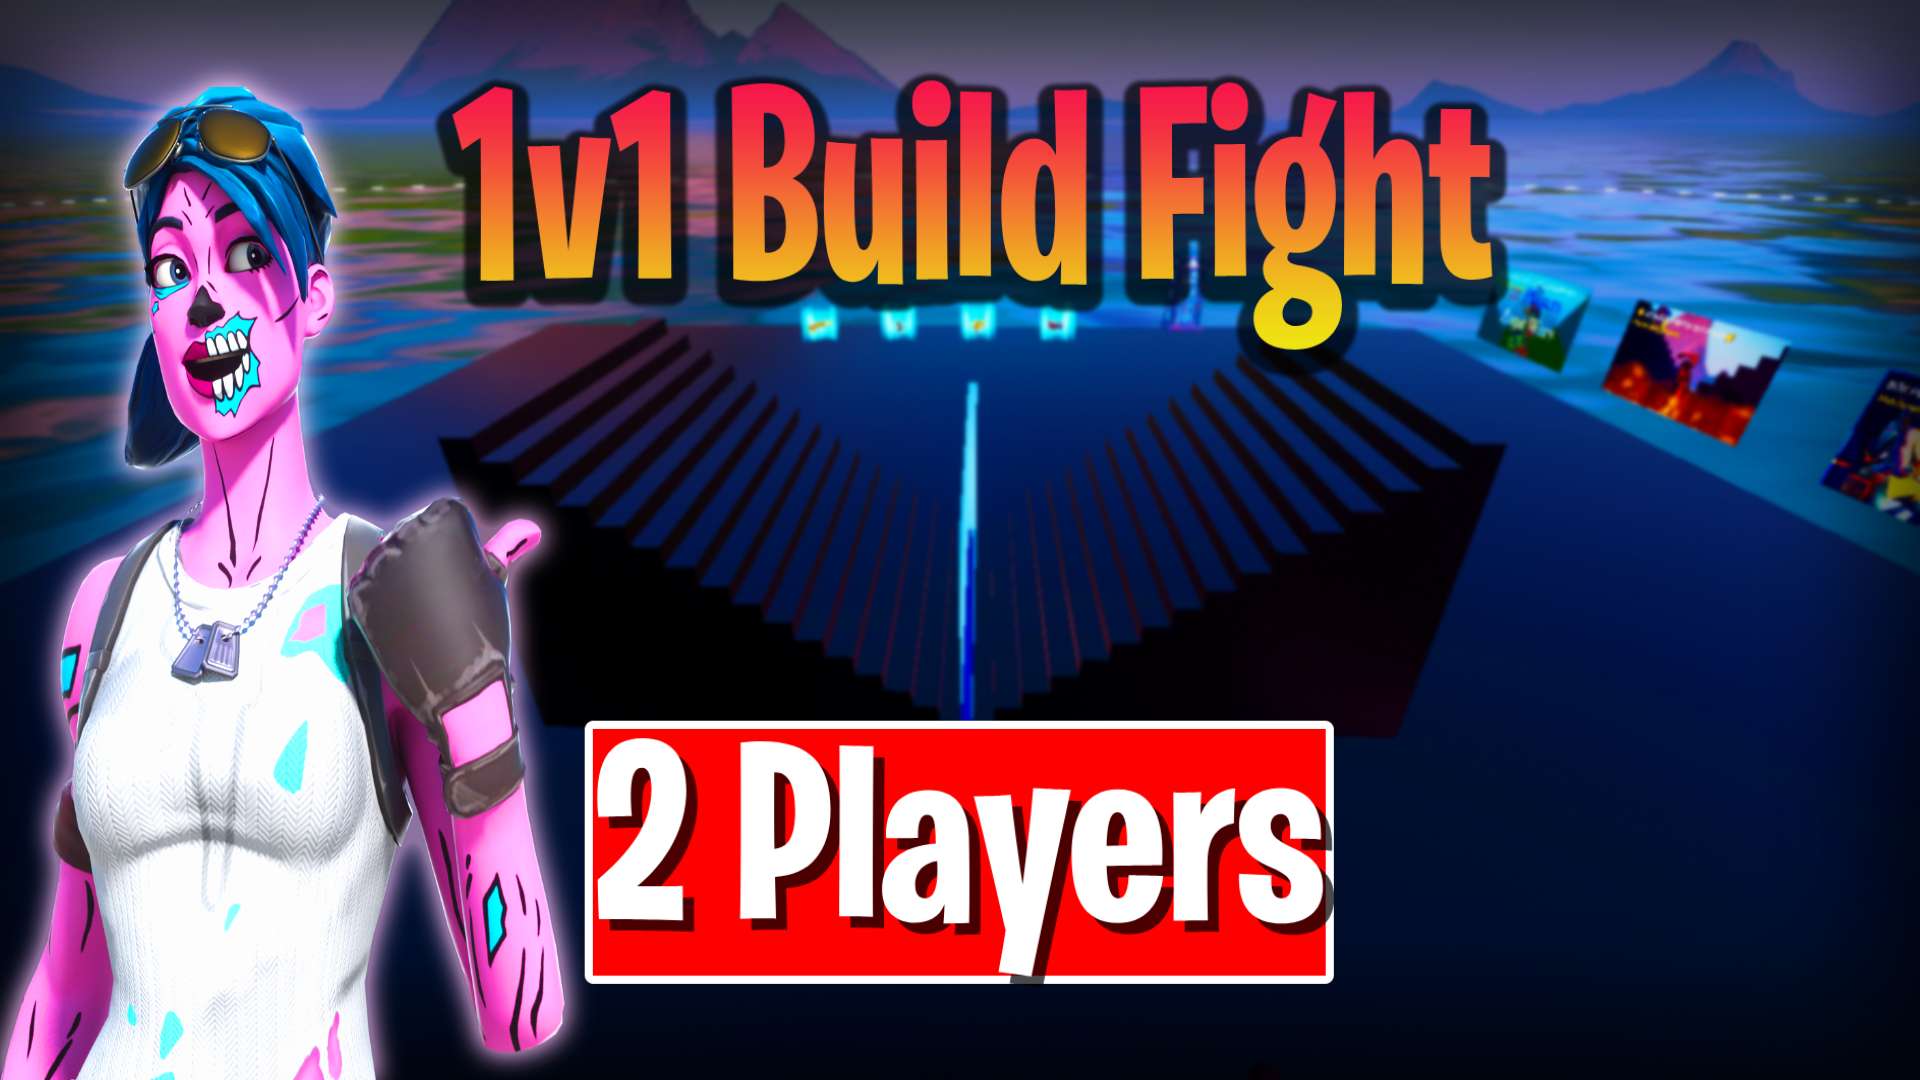 1V1 BUILD FIGHTS (2 Players Only) 1115-5696-8989 by e11 - Fortnite